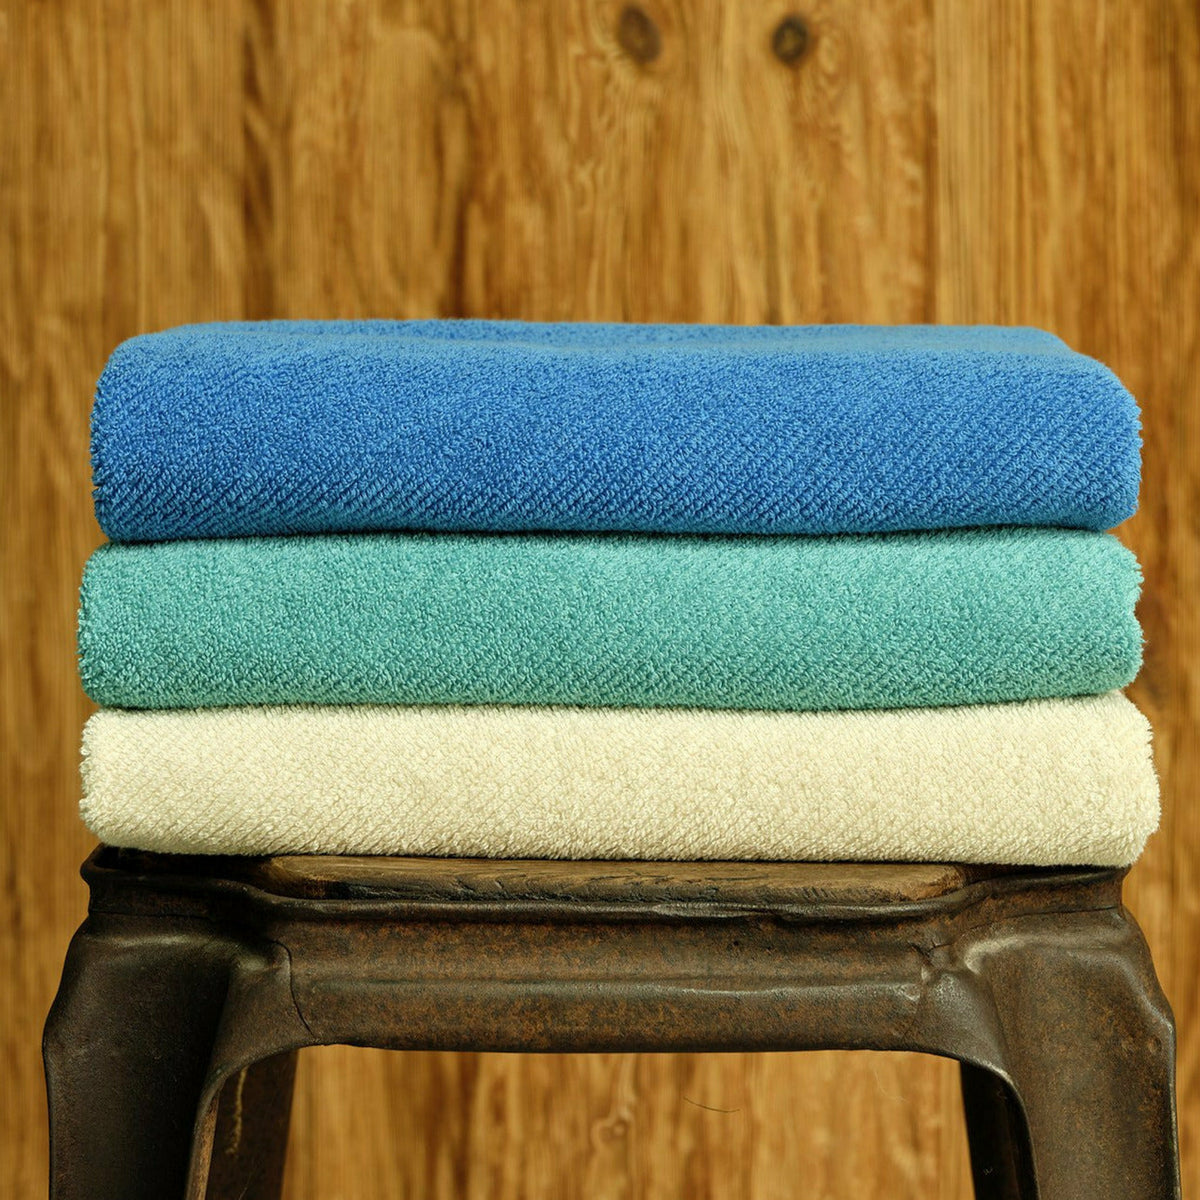 Abyss Twill Bath Towels Stack on Stool Fine Linens 